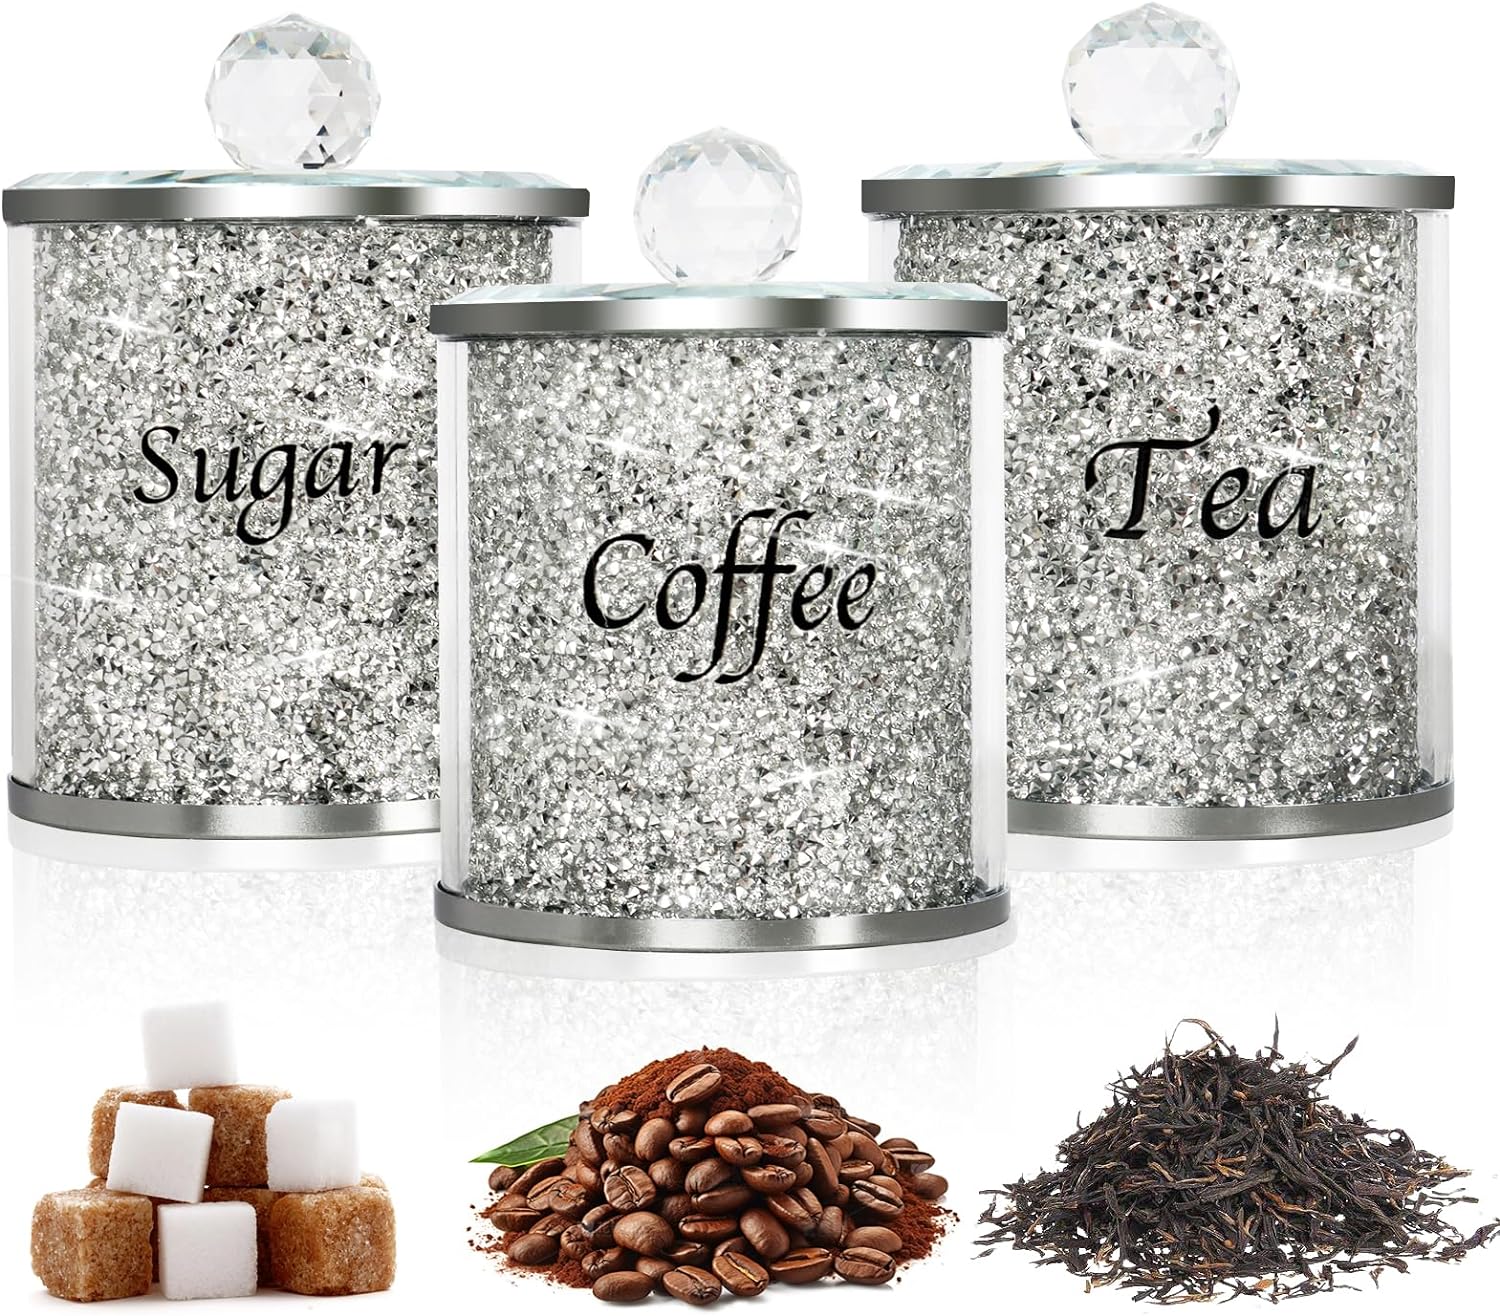 Kitchen Canisters for Countertop, Tea Coffee Sugar Canister Set of 3, 1000ml/34oz Crystal Glass Jars, Silver Wide-mouth Coffee Bean Jar with Lid, Crushed Diamond Food Storage Containers for Home Decor